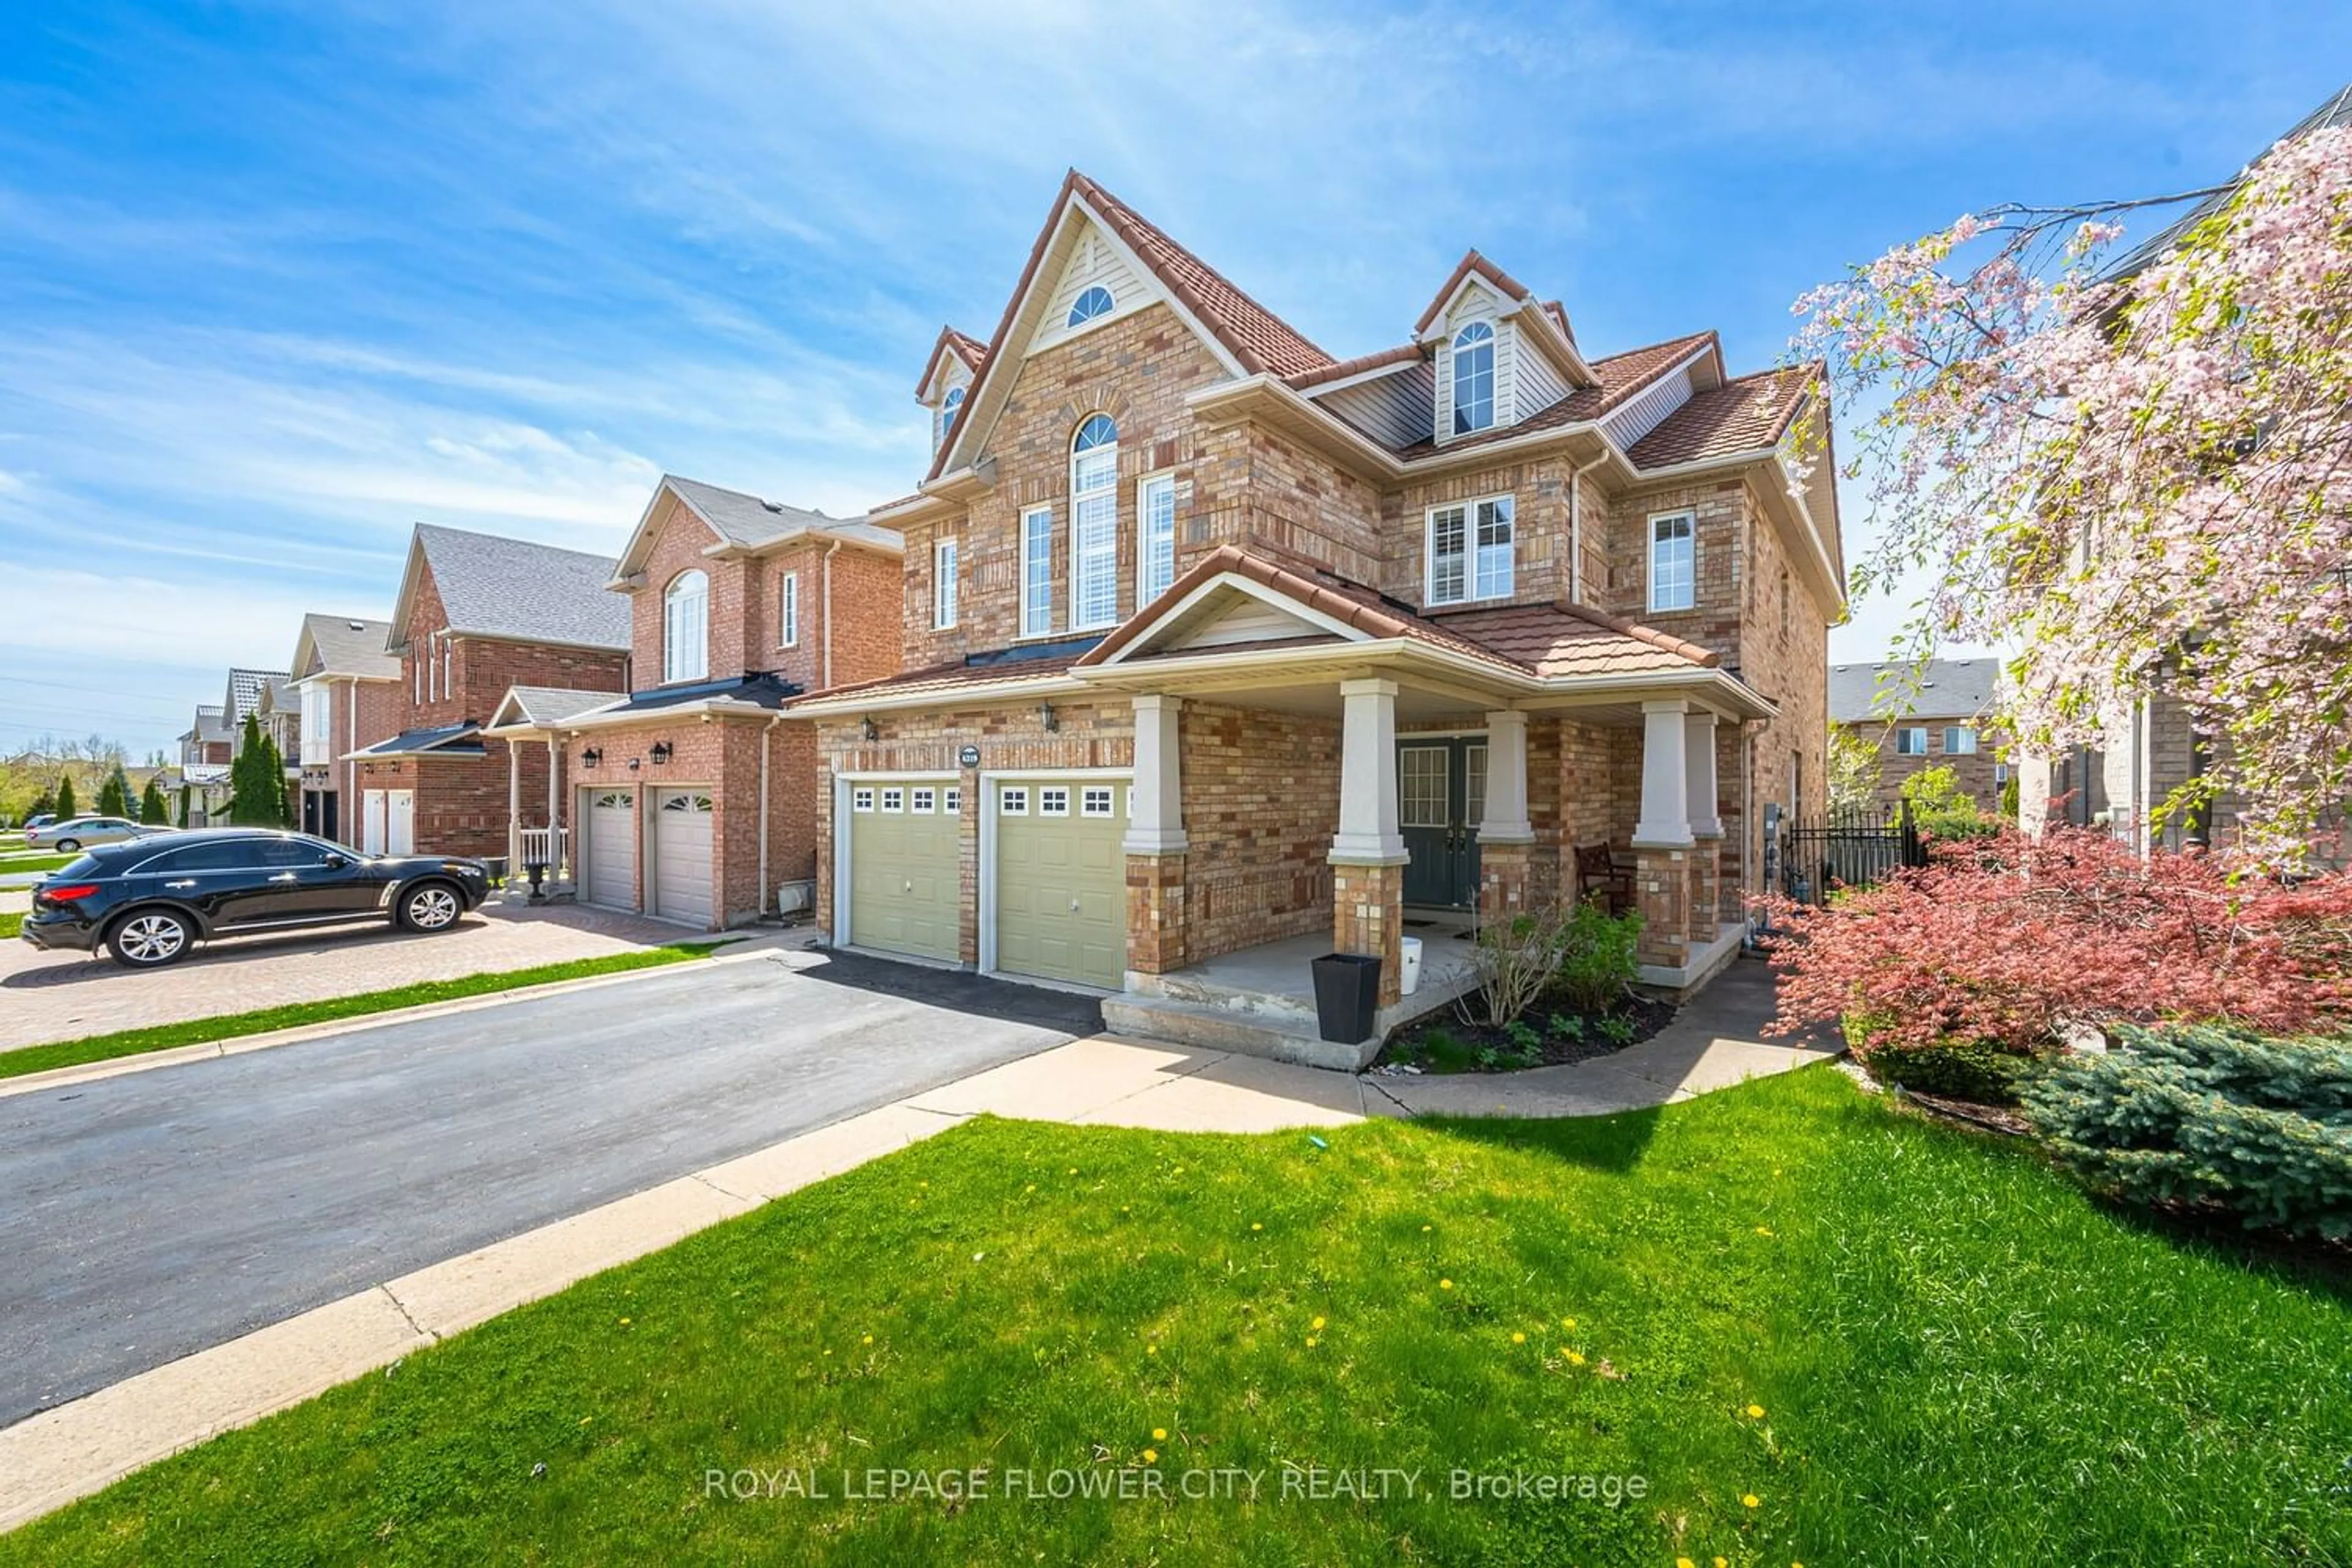 Home with brick exterior material for 4219 Trailmaster Dr, Mississauga Ontario L5V 3B9